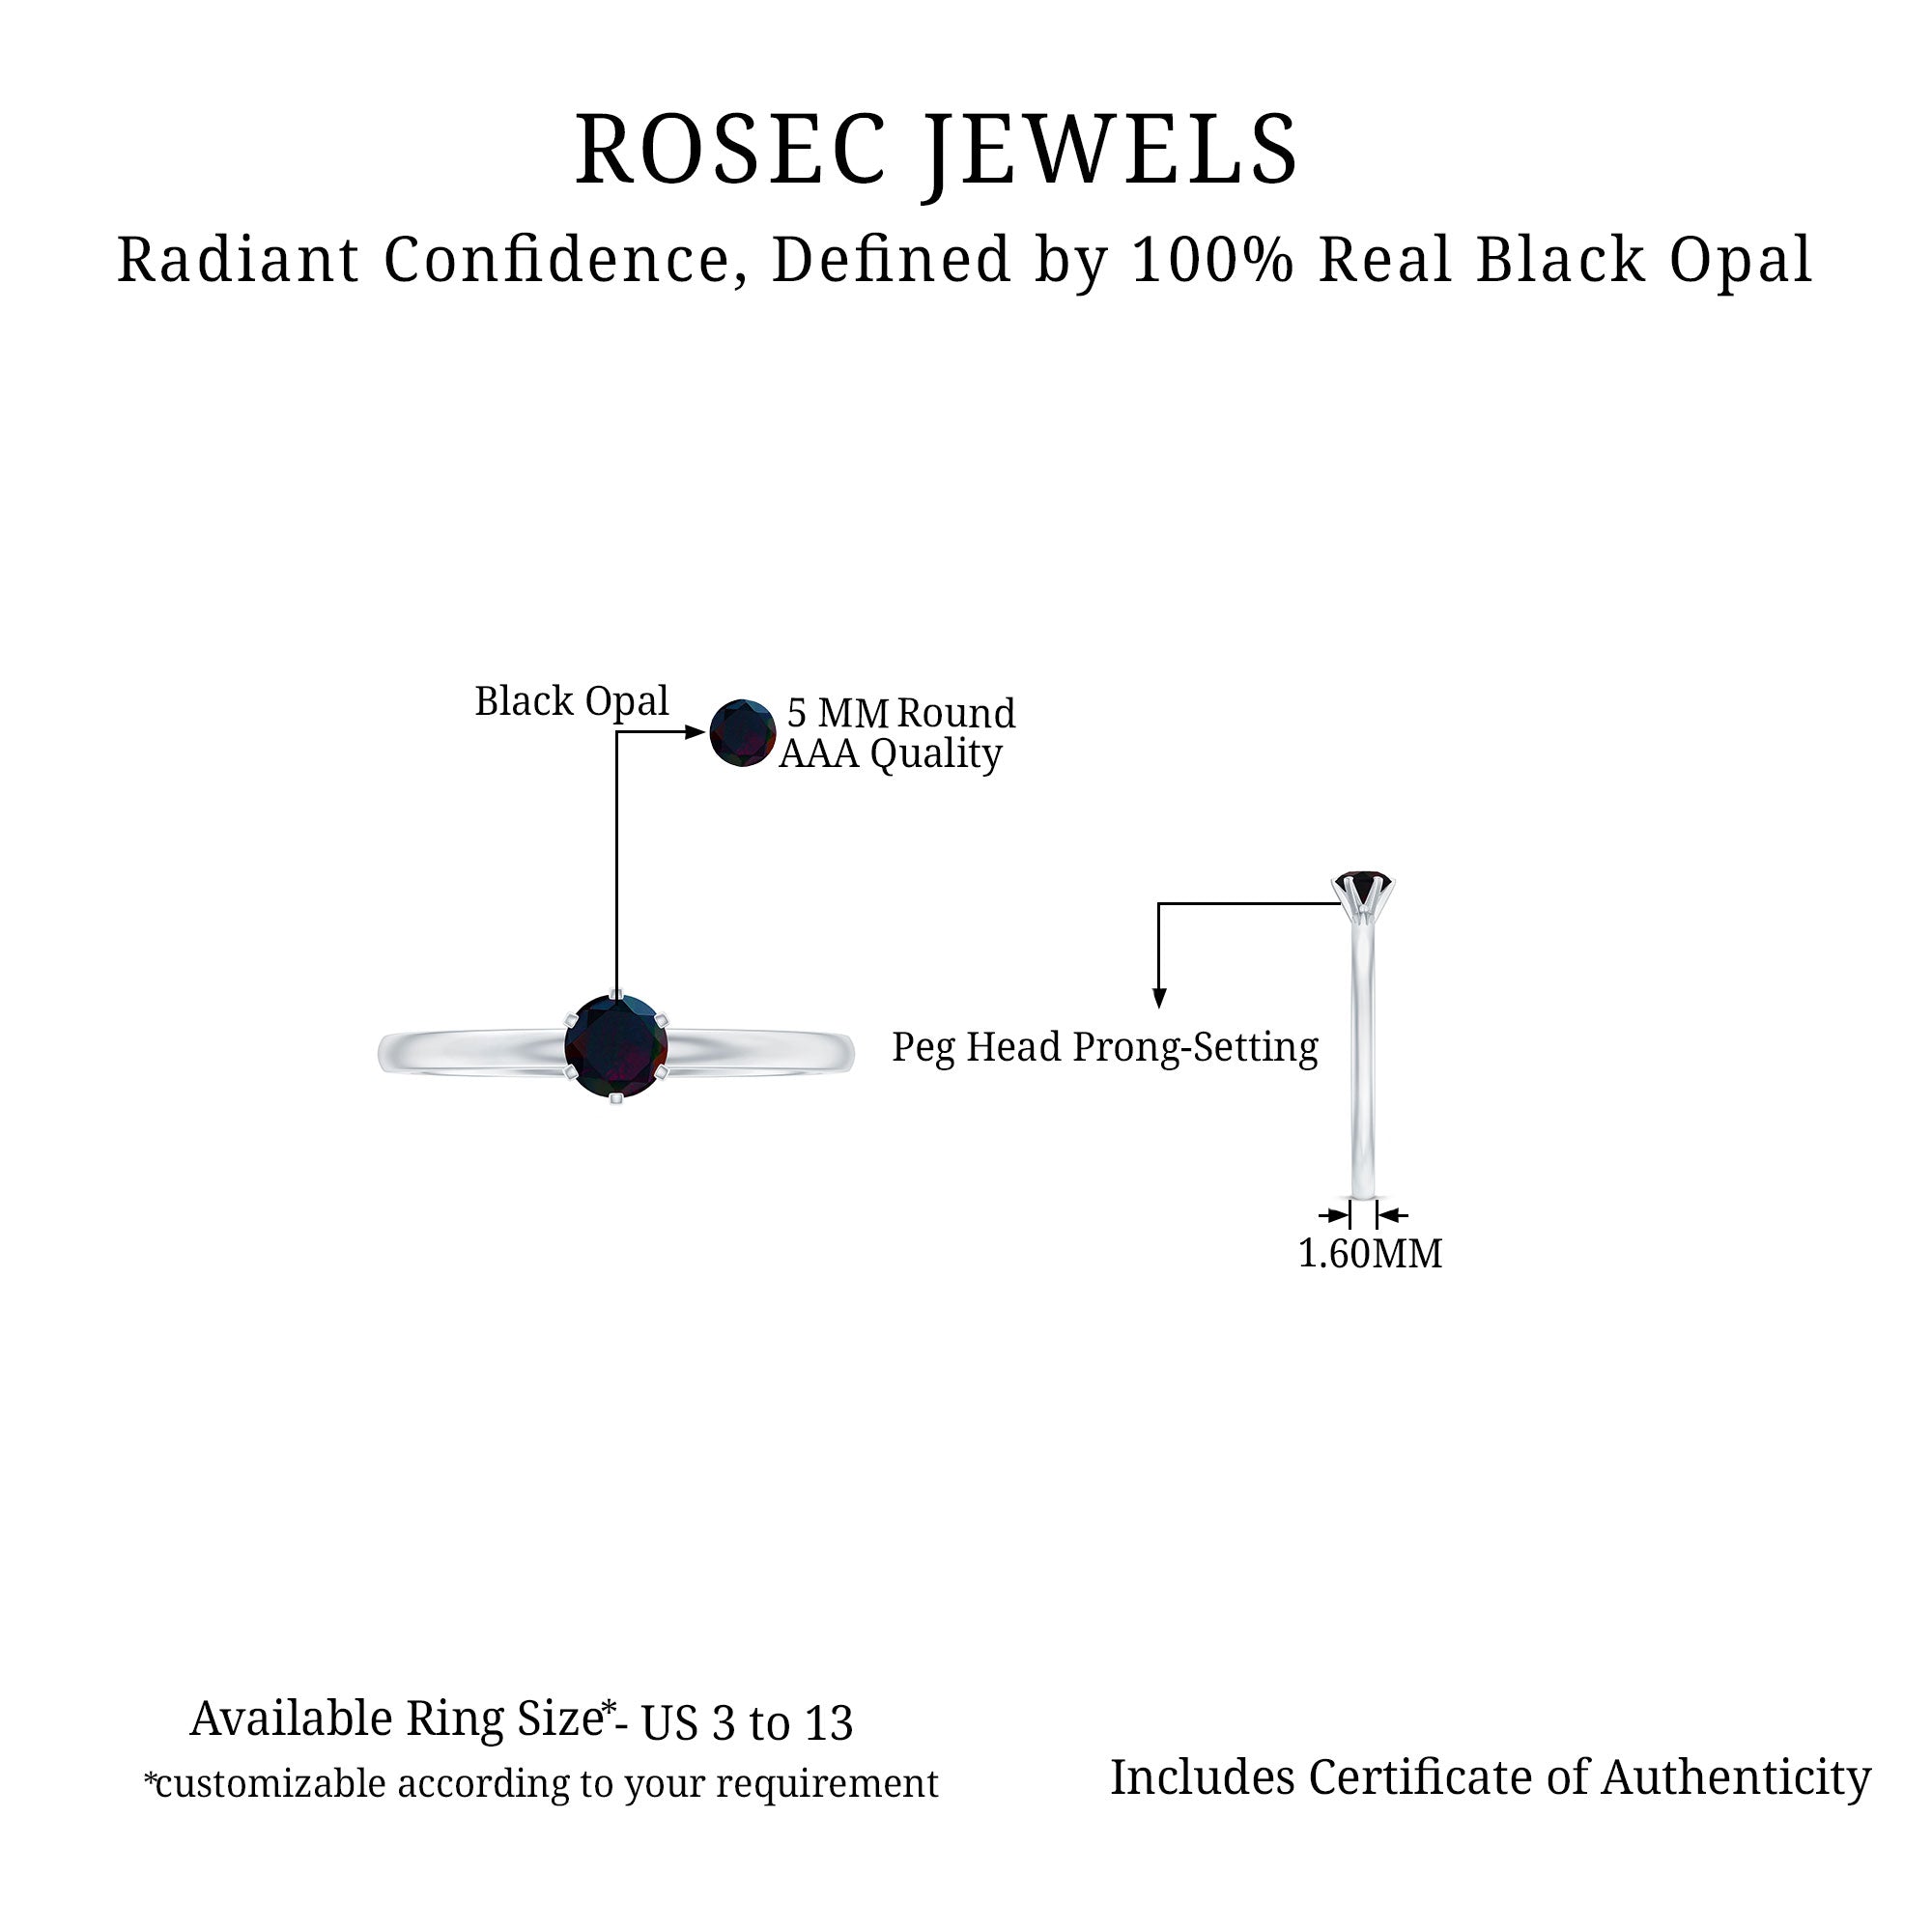 Rosec Jewels-Minimal Black Opal Solitaire Promise Ring in Gold